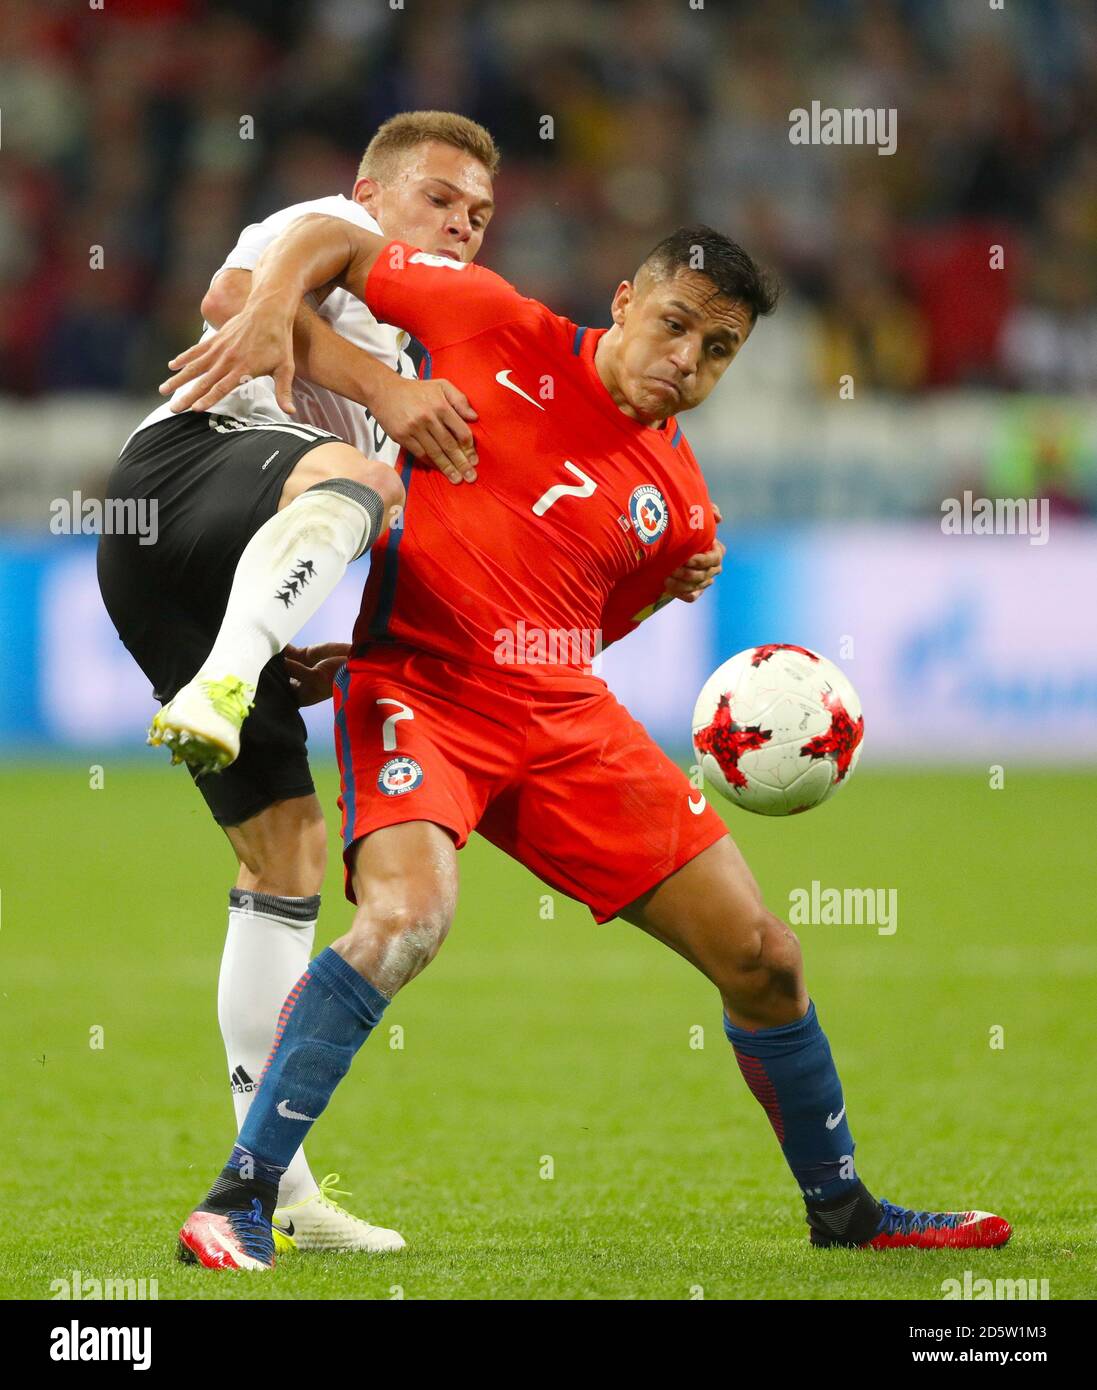 Germany's Joshua Kimmich (left) and Chile's Alexis Sanchez battle for the ball Stock Photo